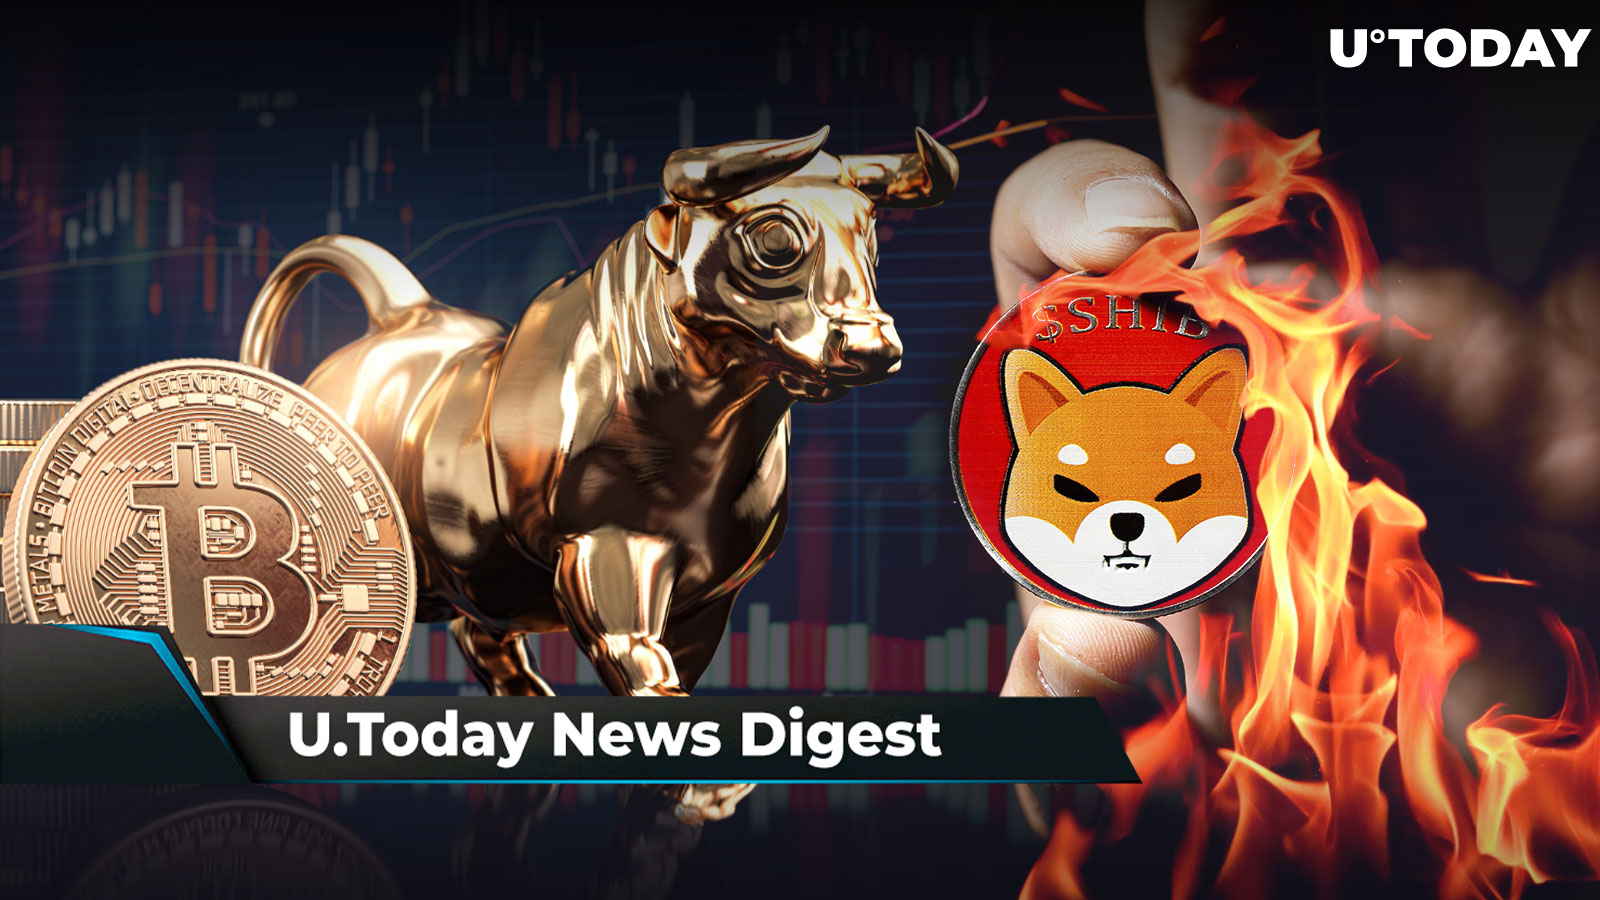 BONE Price Spikes 20%, SHIB Burn Rate up 889%, BTC Experiences “Most Bullish Thing” Ever: Crypto News Digest by U.Today